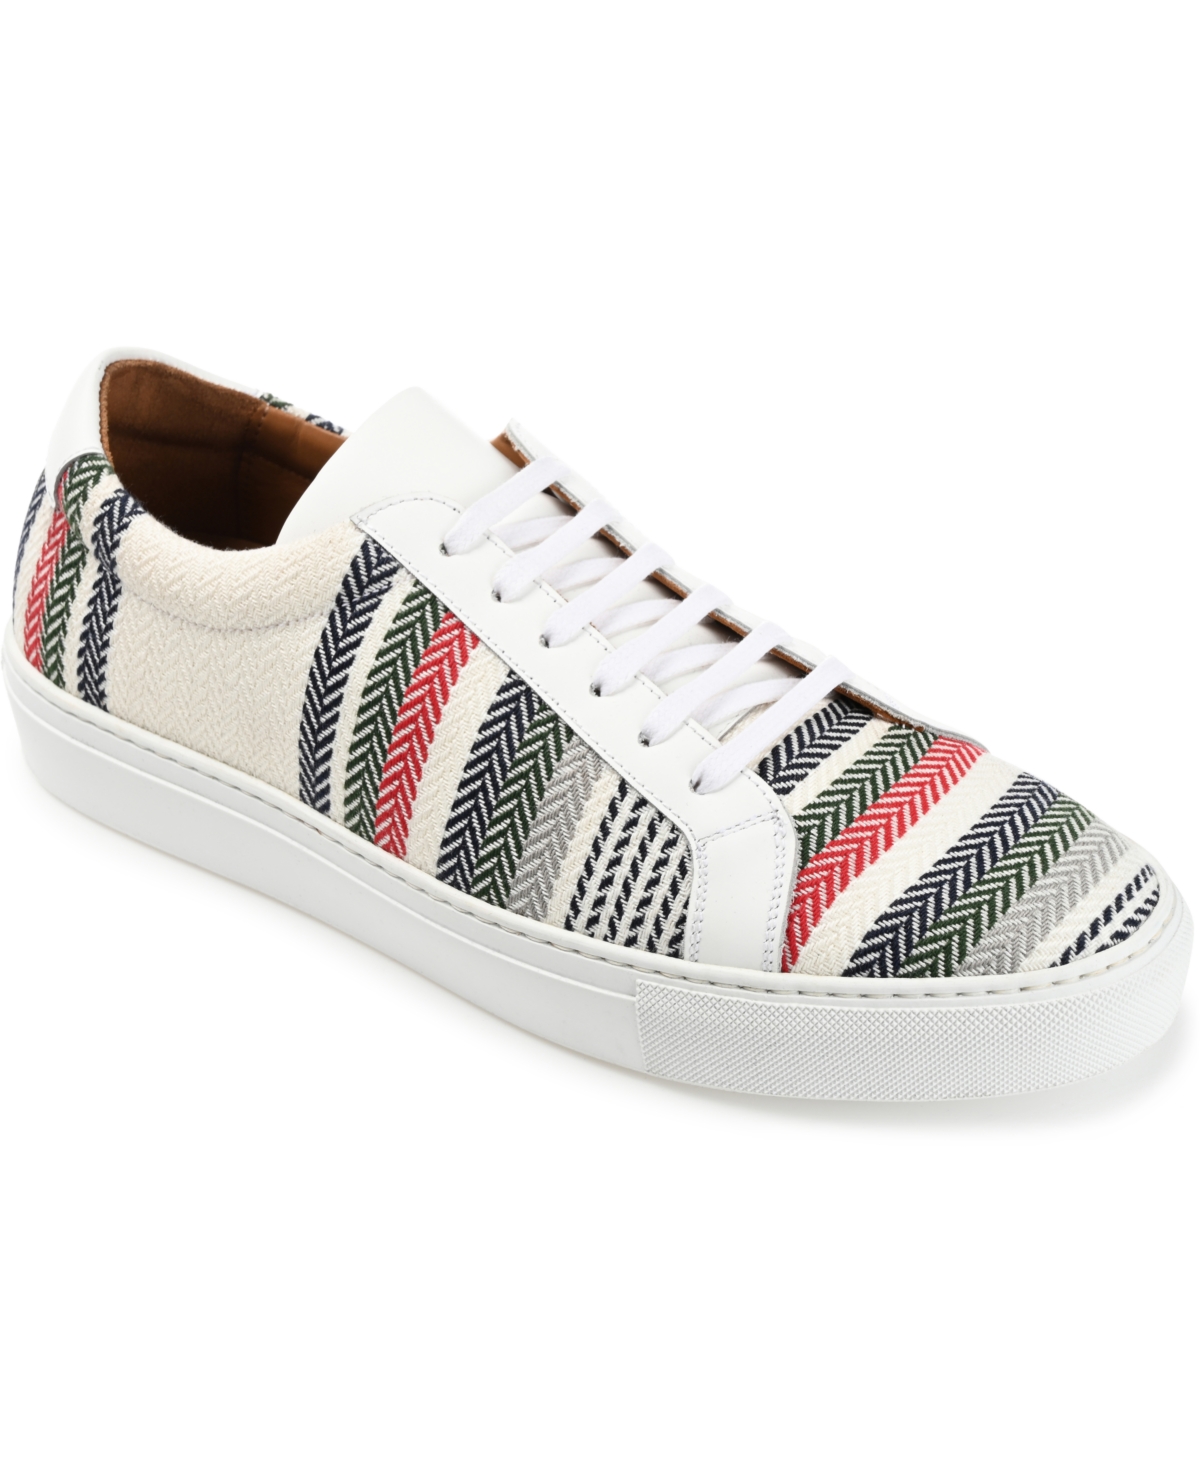 Taft Men's Jack Handcrafted Leather And Water-repellent Sneakers In Stripe